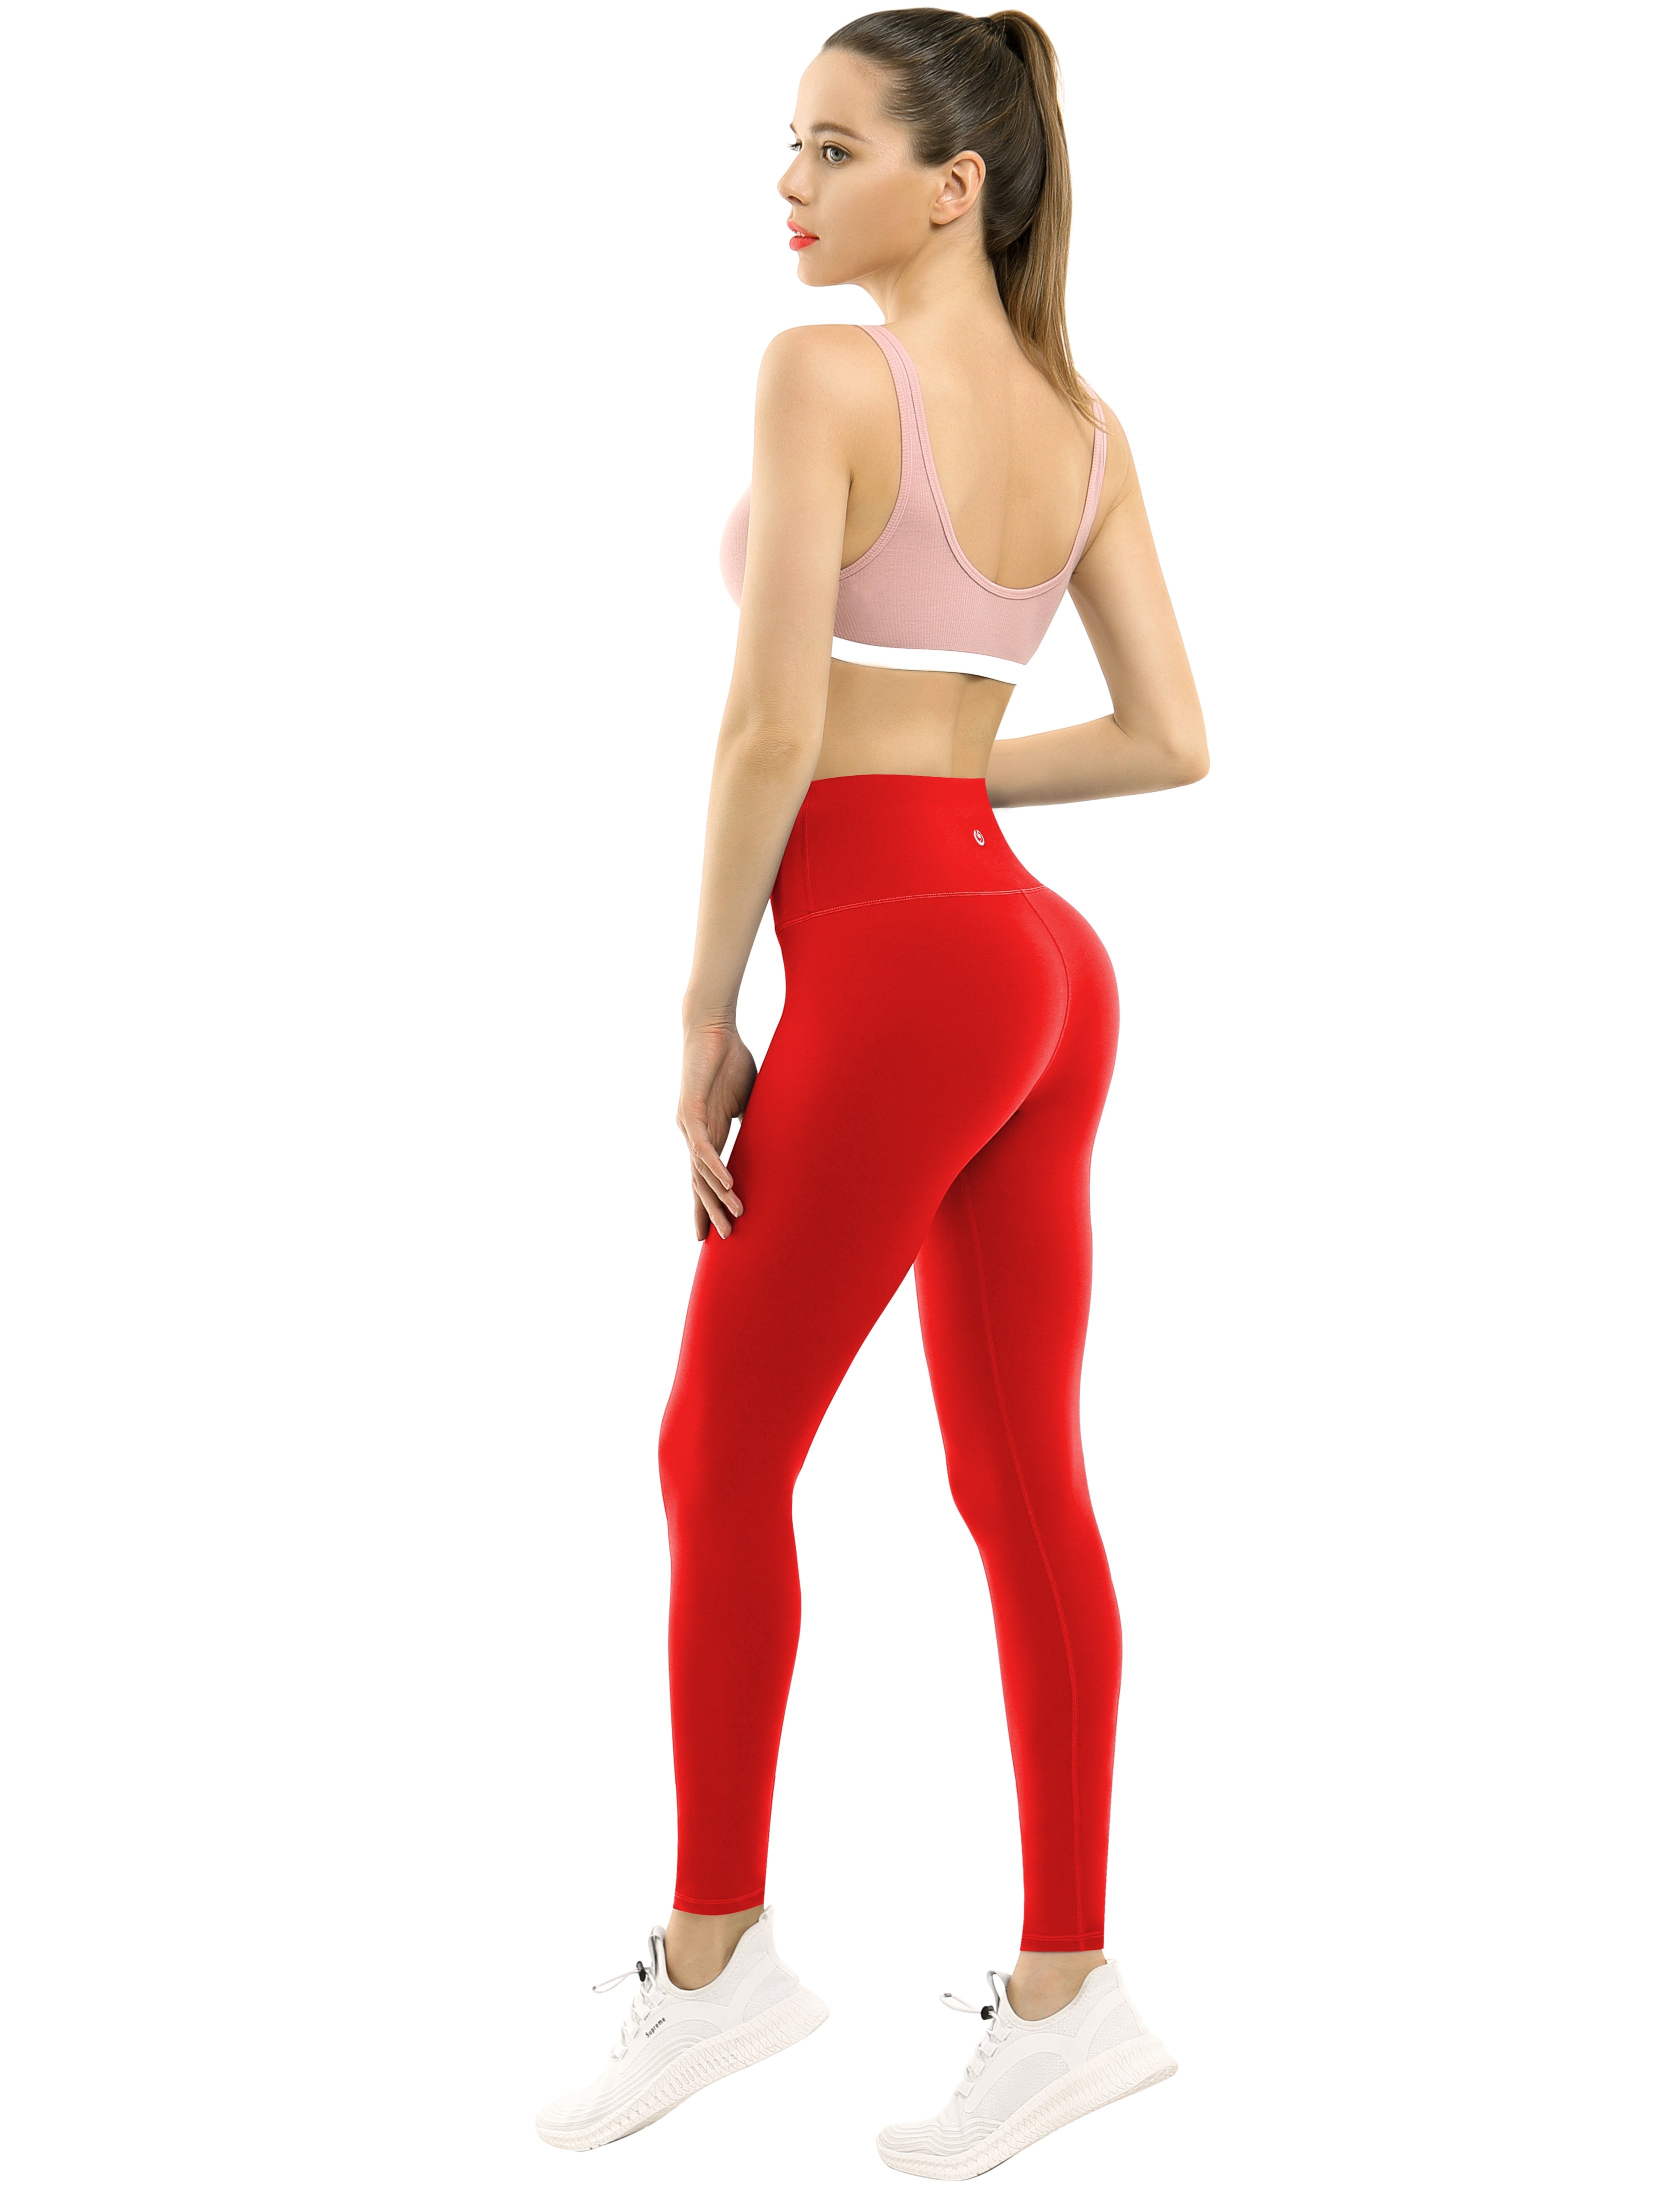 High Waist Biking Pants scarlet 75%Nylon/25%Spandex Fabric doesn't attract lint easily 4-way stretch No see-through Moisture-wicking Tummy control Inner pocket Four lengths